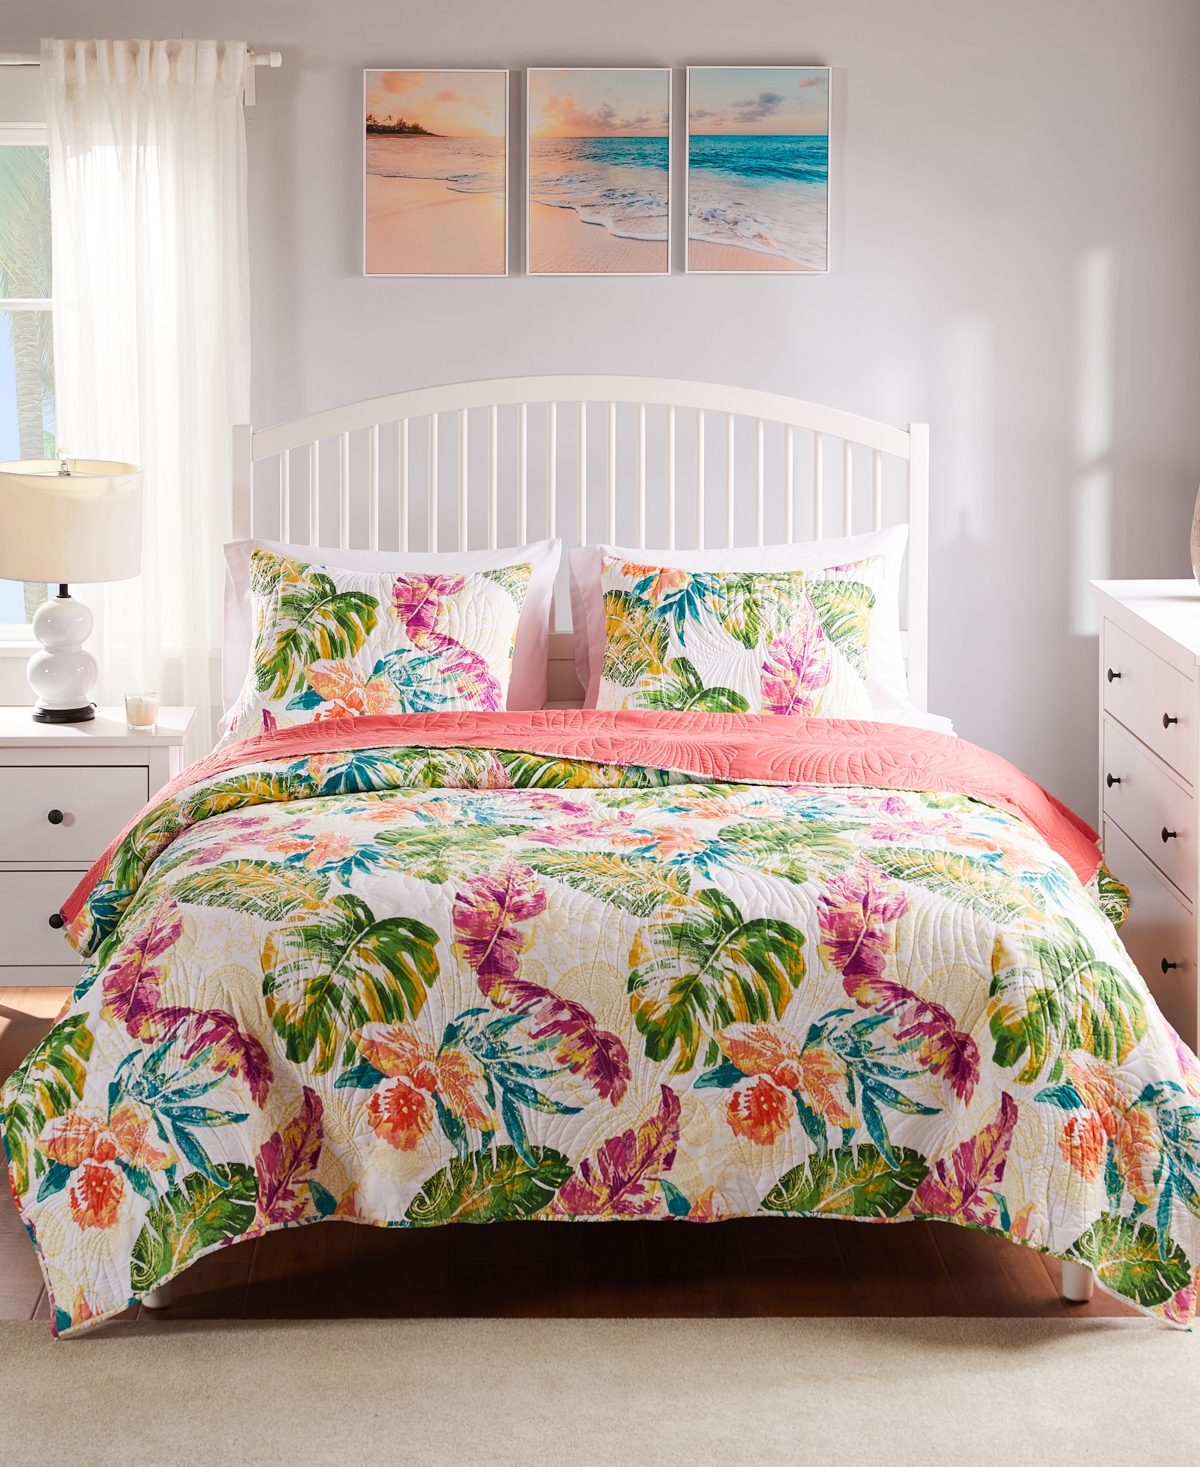 Greenland Home Fashions Tropics Coastal Palm 3 Piece Quilt Set, King/california King In Coral